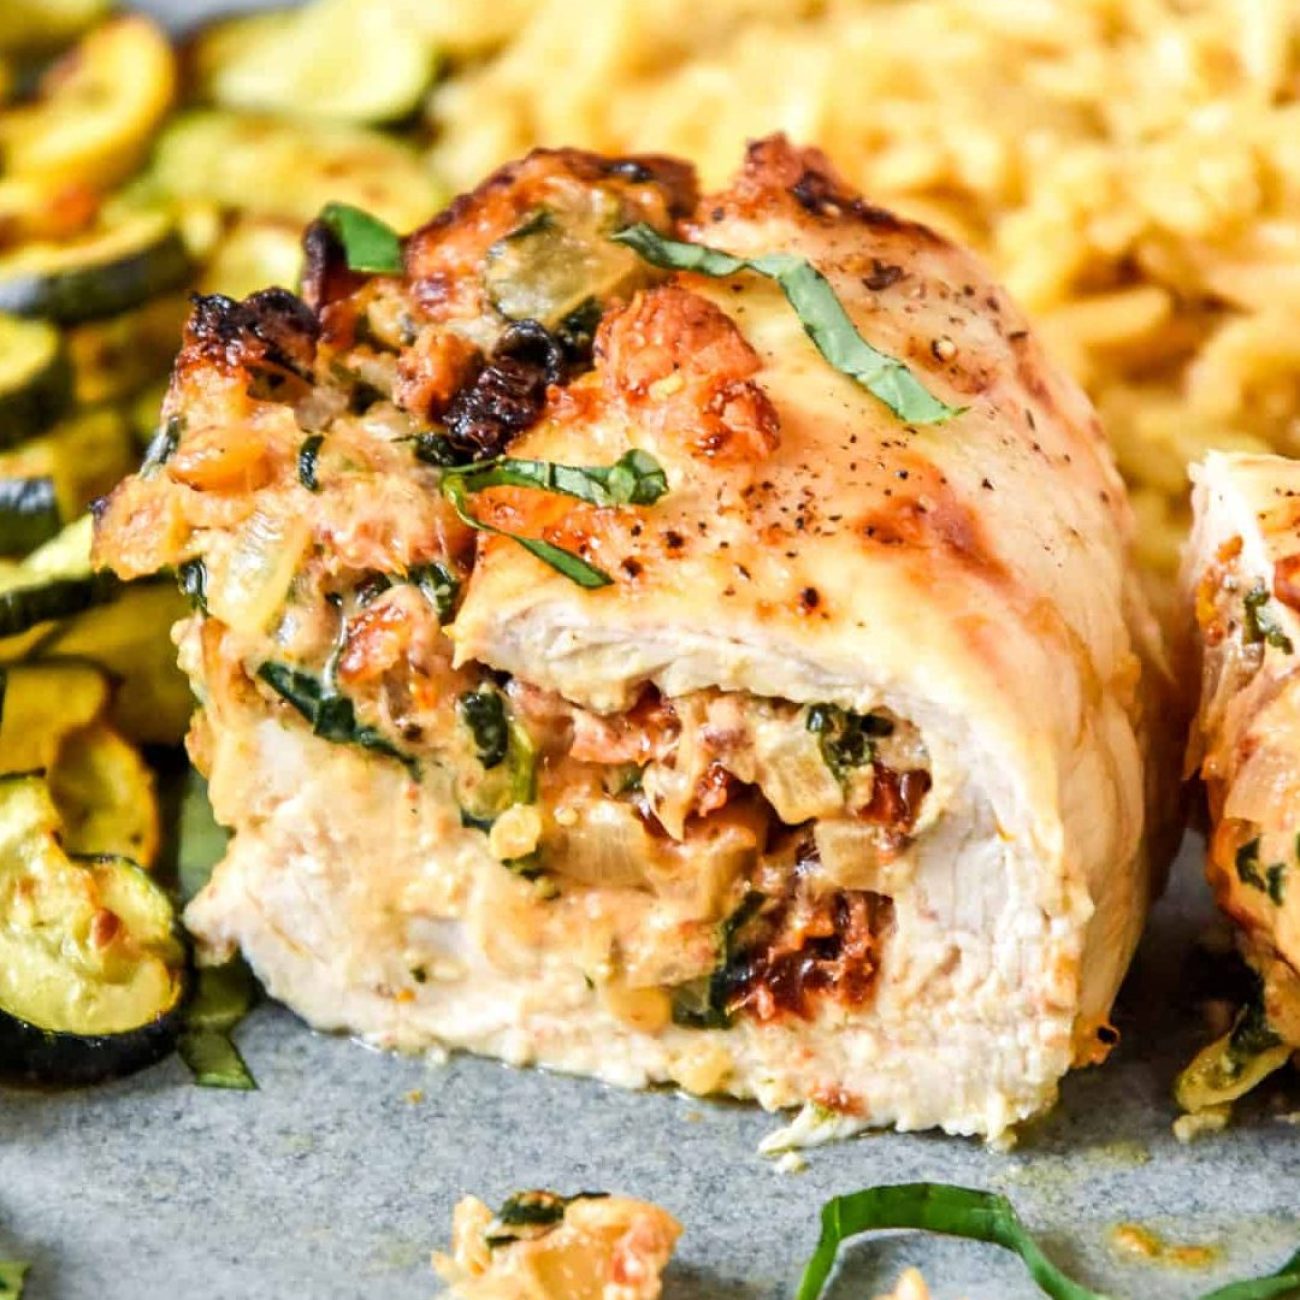 Provolone & Olive Stuffed Chicken Breasts